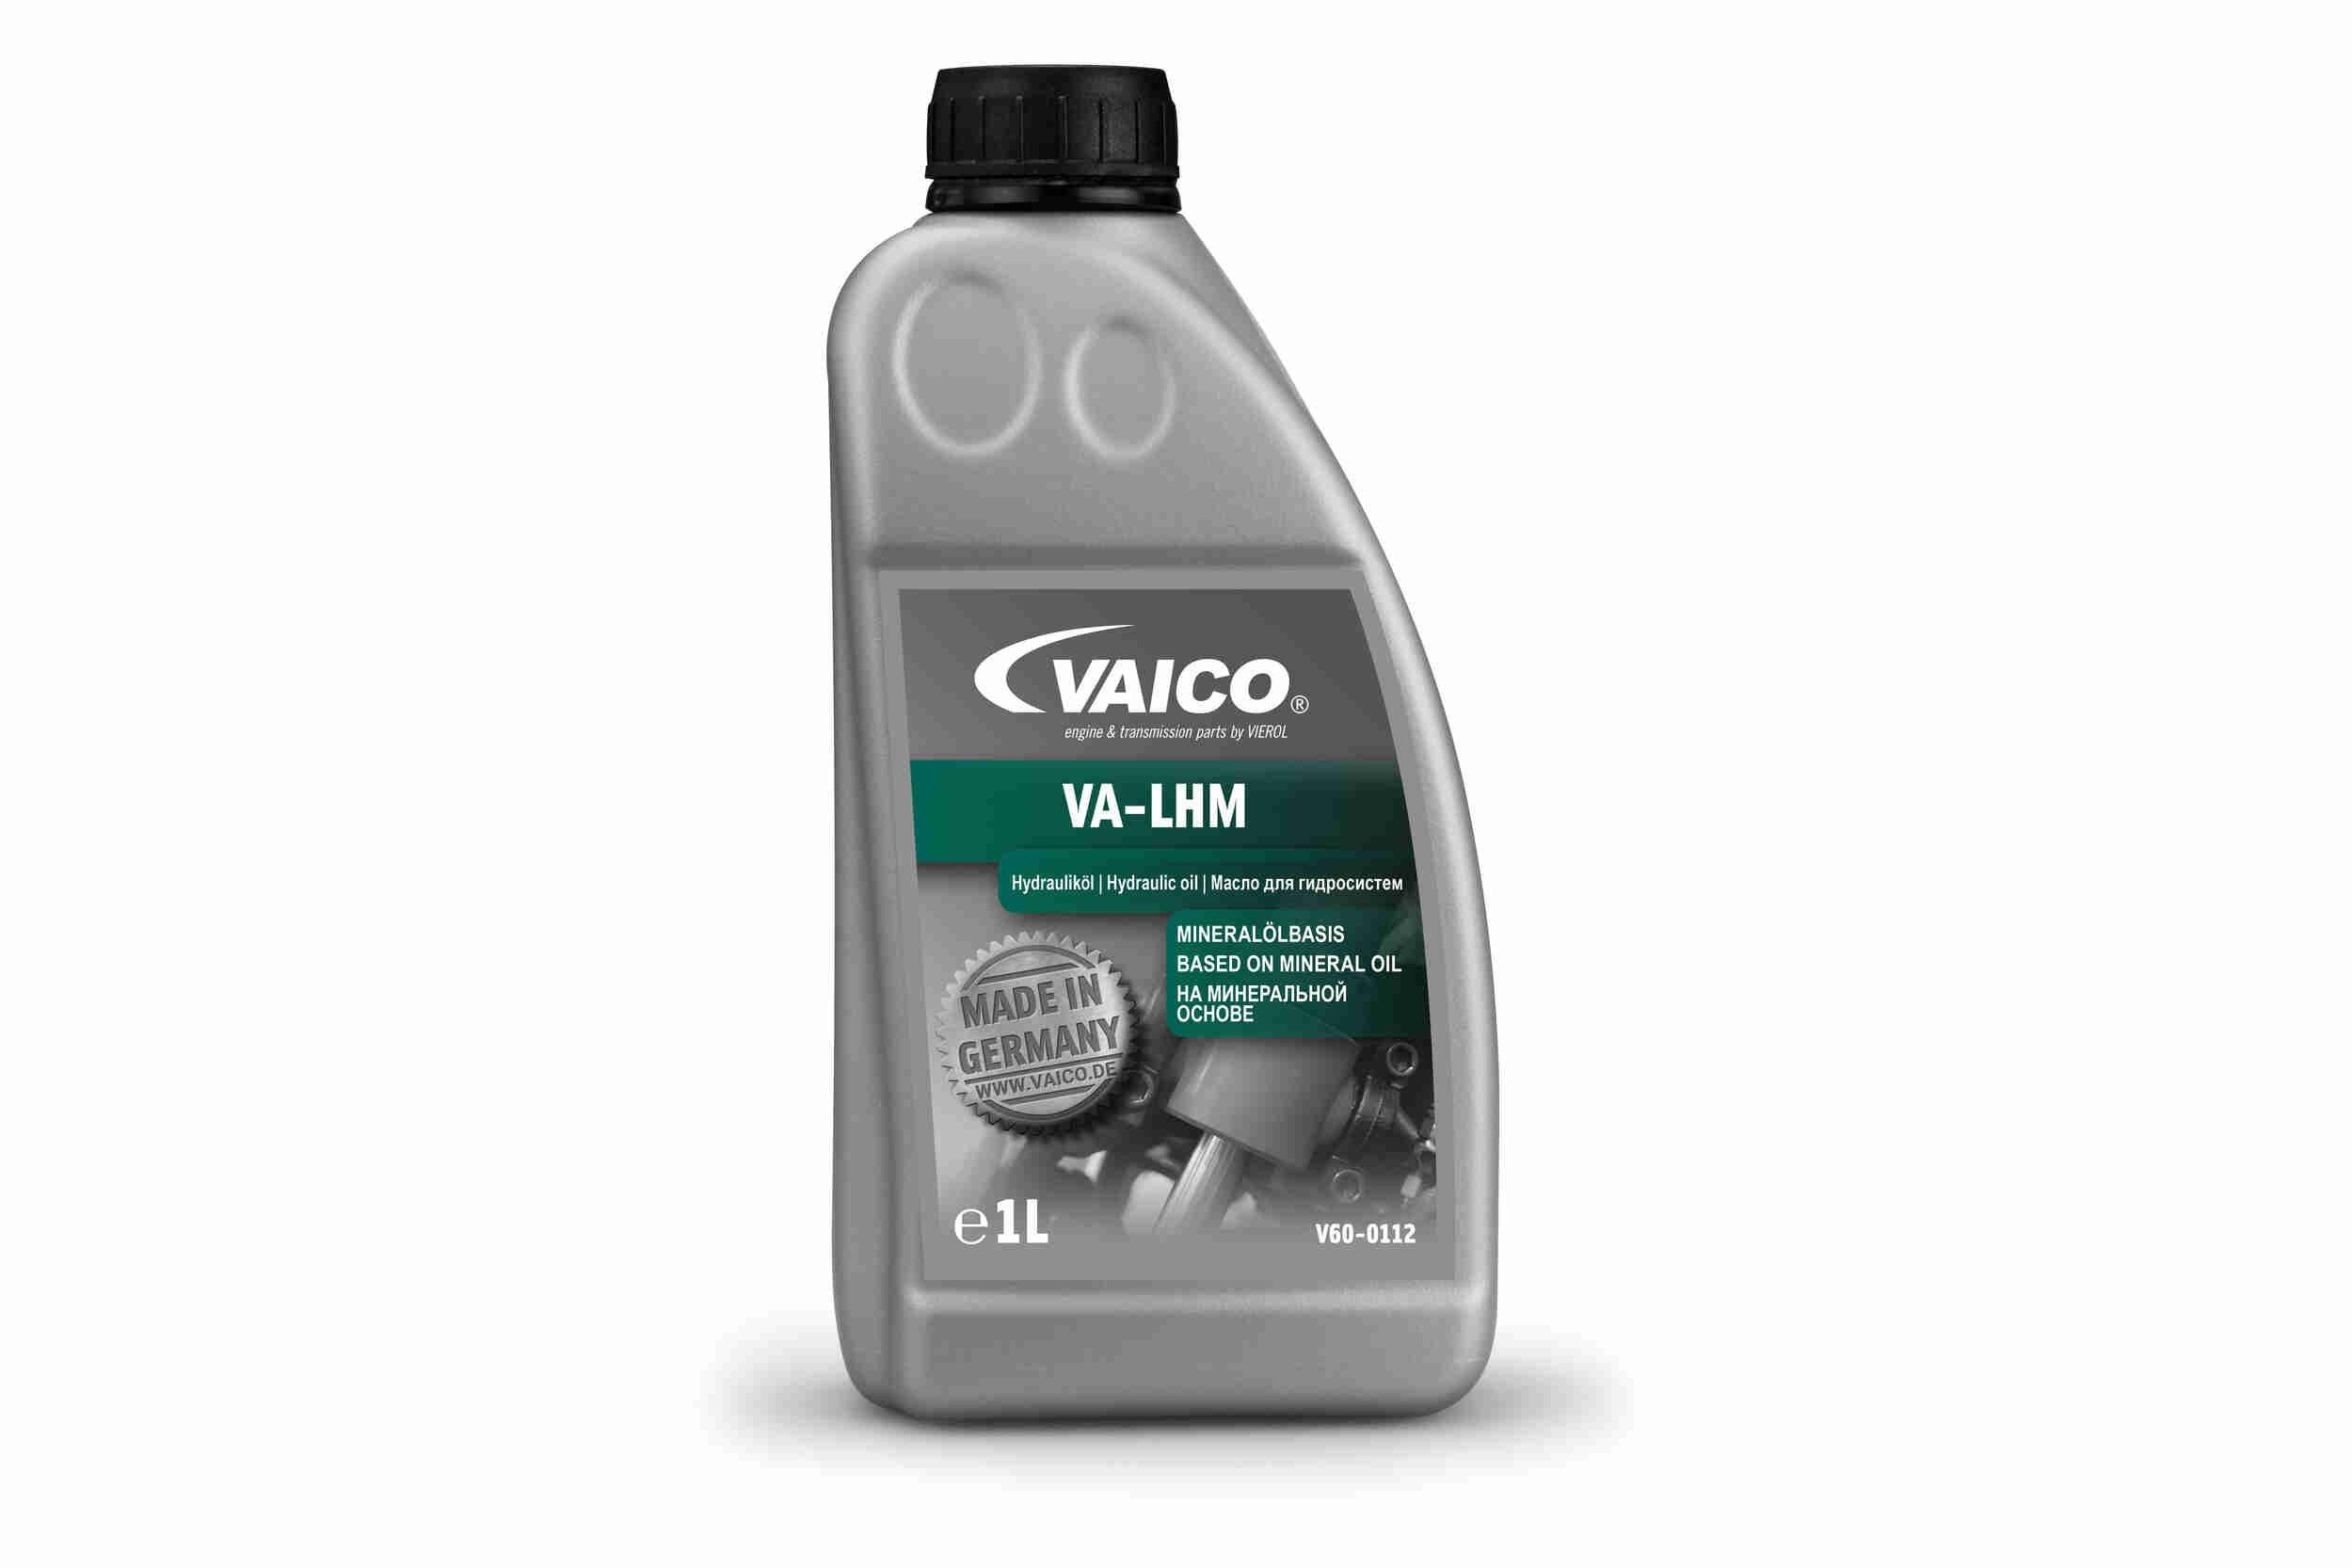 VAICO V60-0112 Central Hydraulic Oil VW experience and price